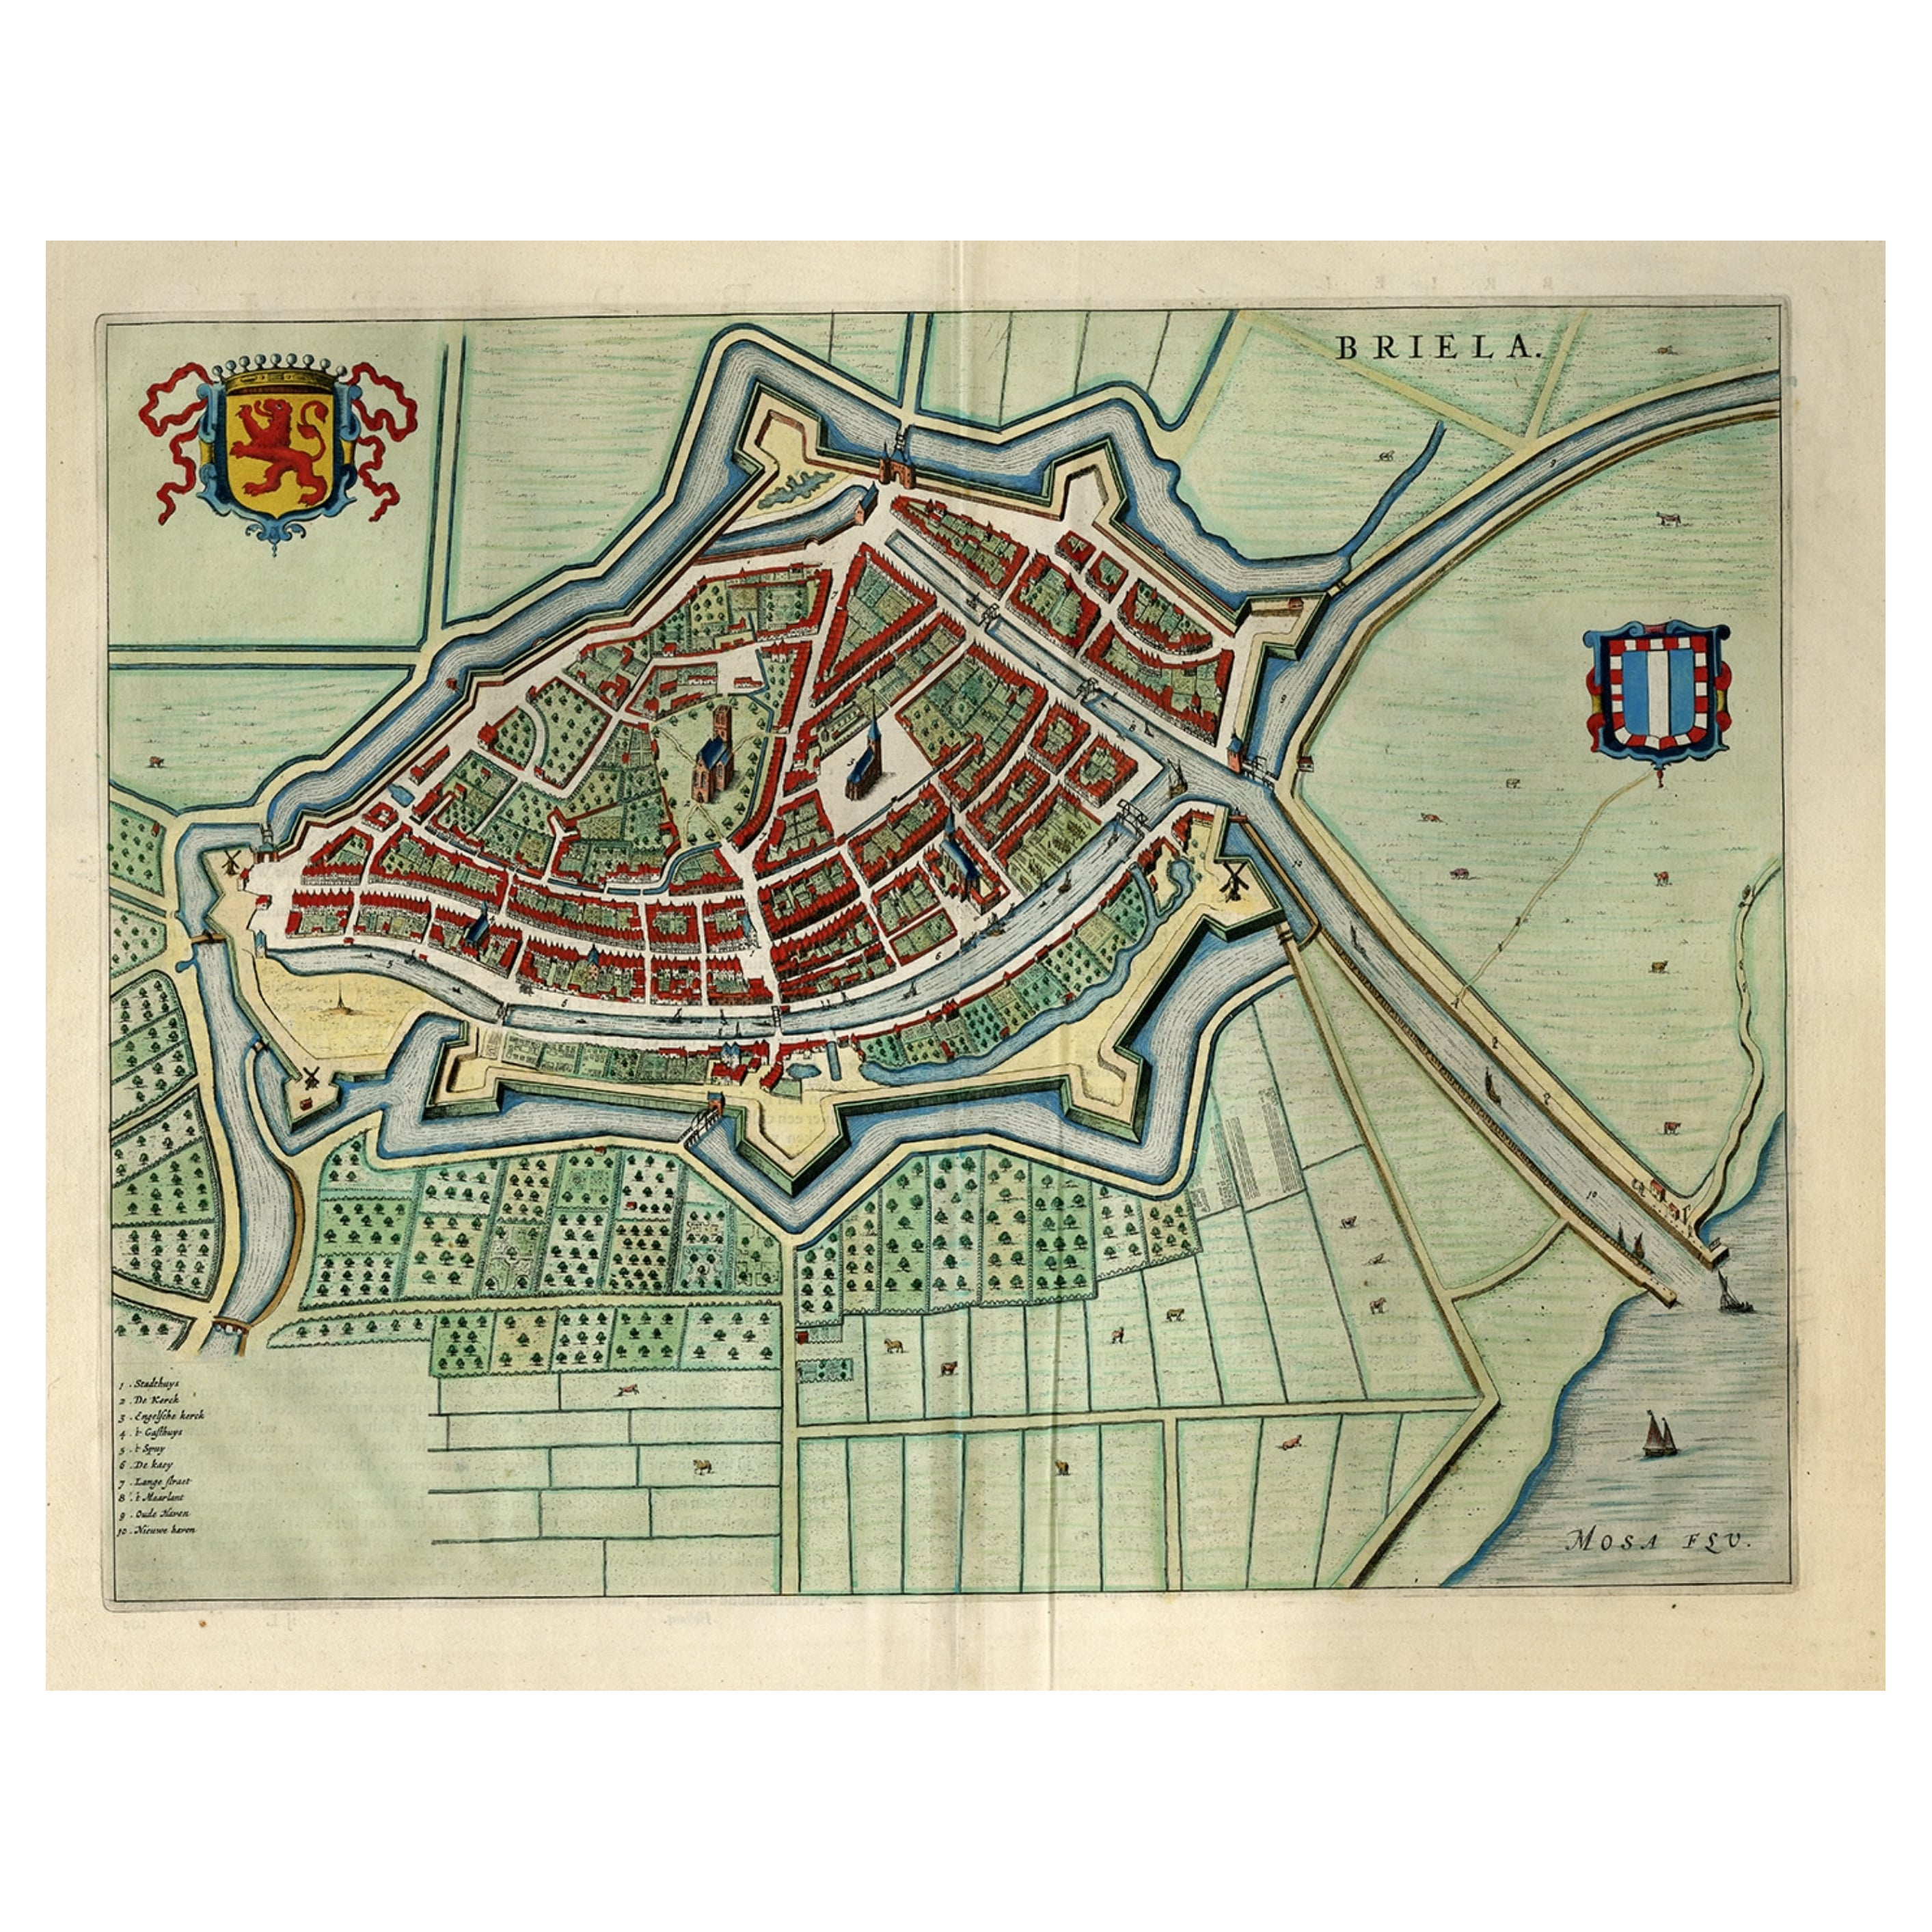 Great Antique Bird's-Eye View Plan of Brielle by Blaeu in The Netherlands, 1649